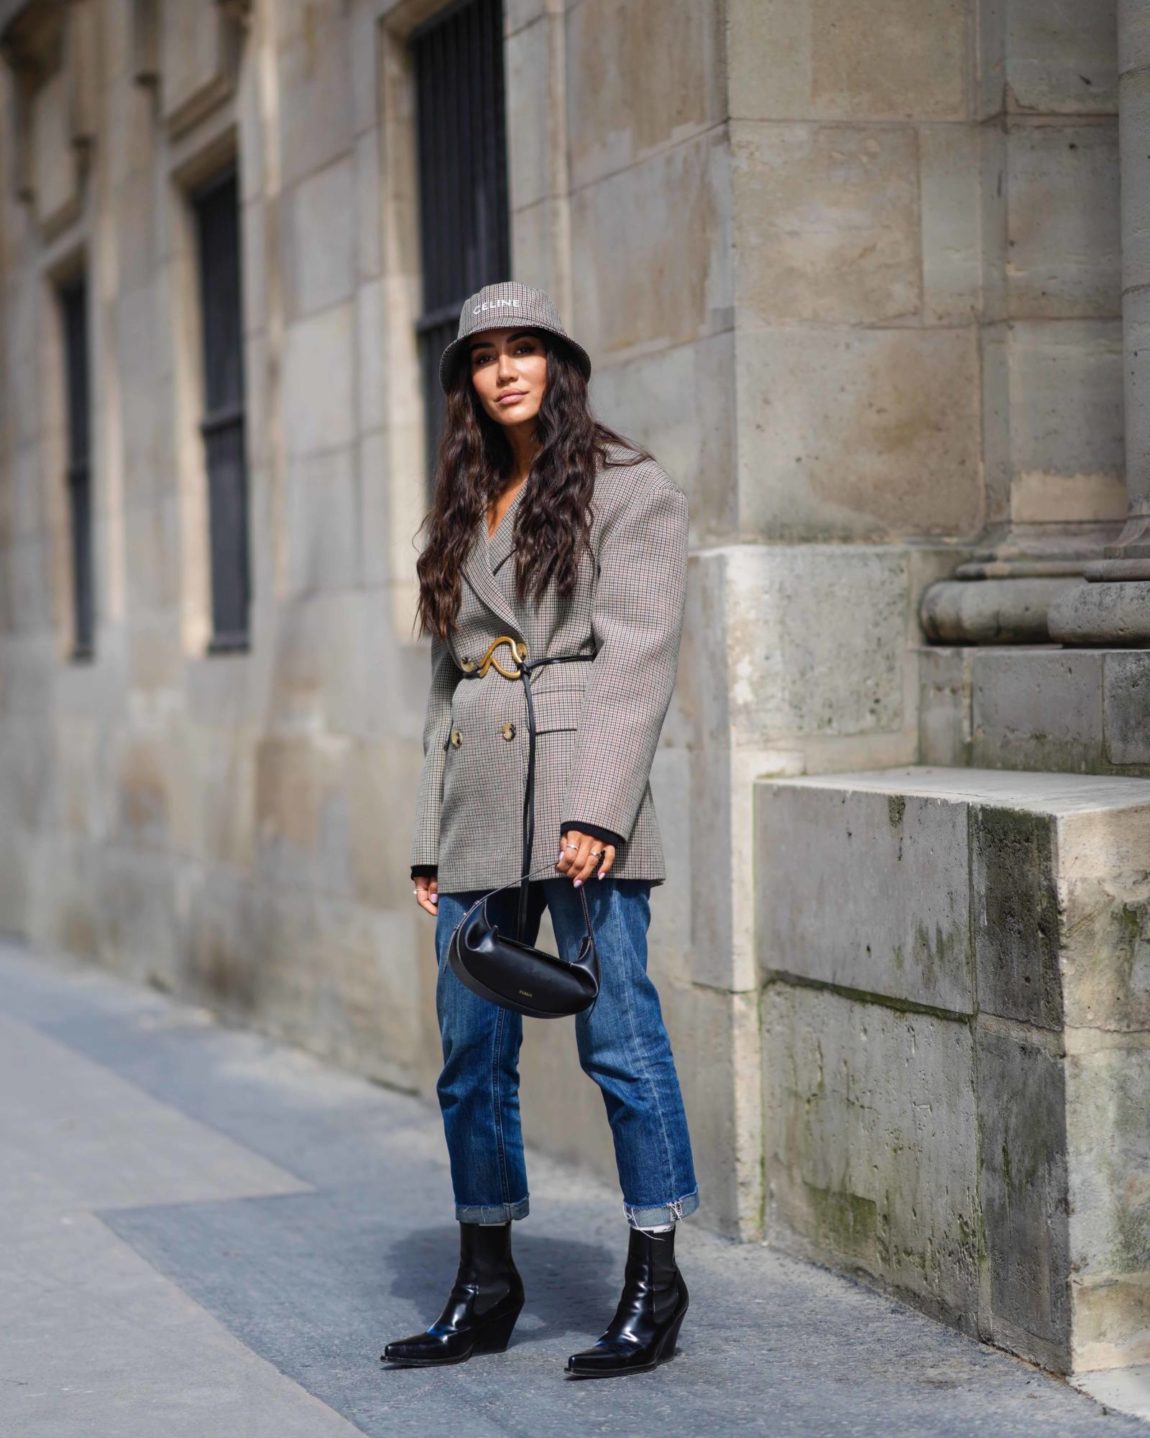 The Bucket Hat - Revival Trend or Style Staple? - Glam & Glitter